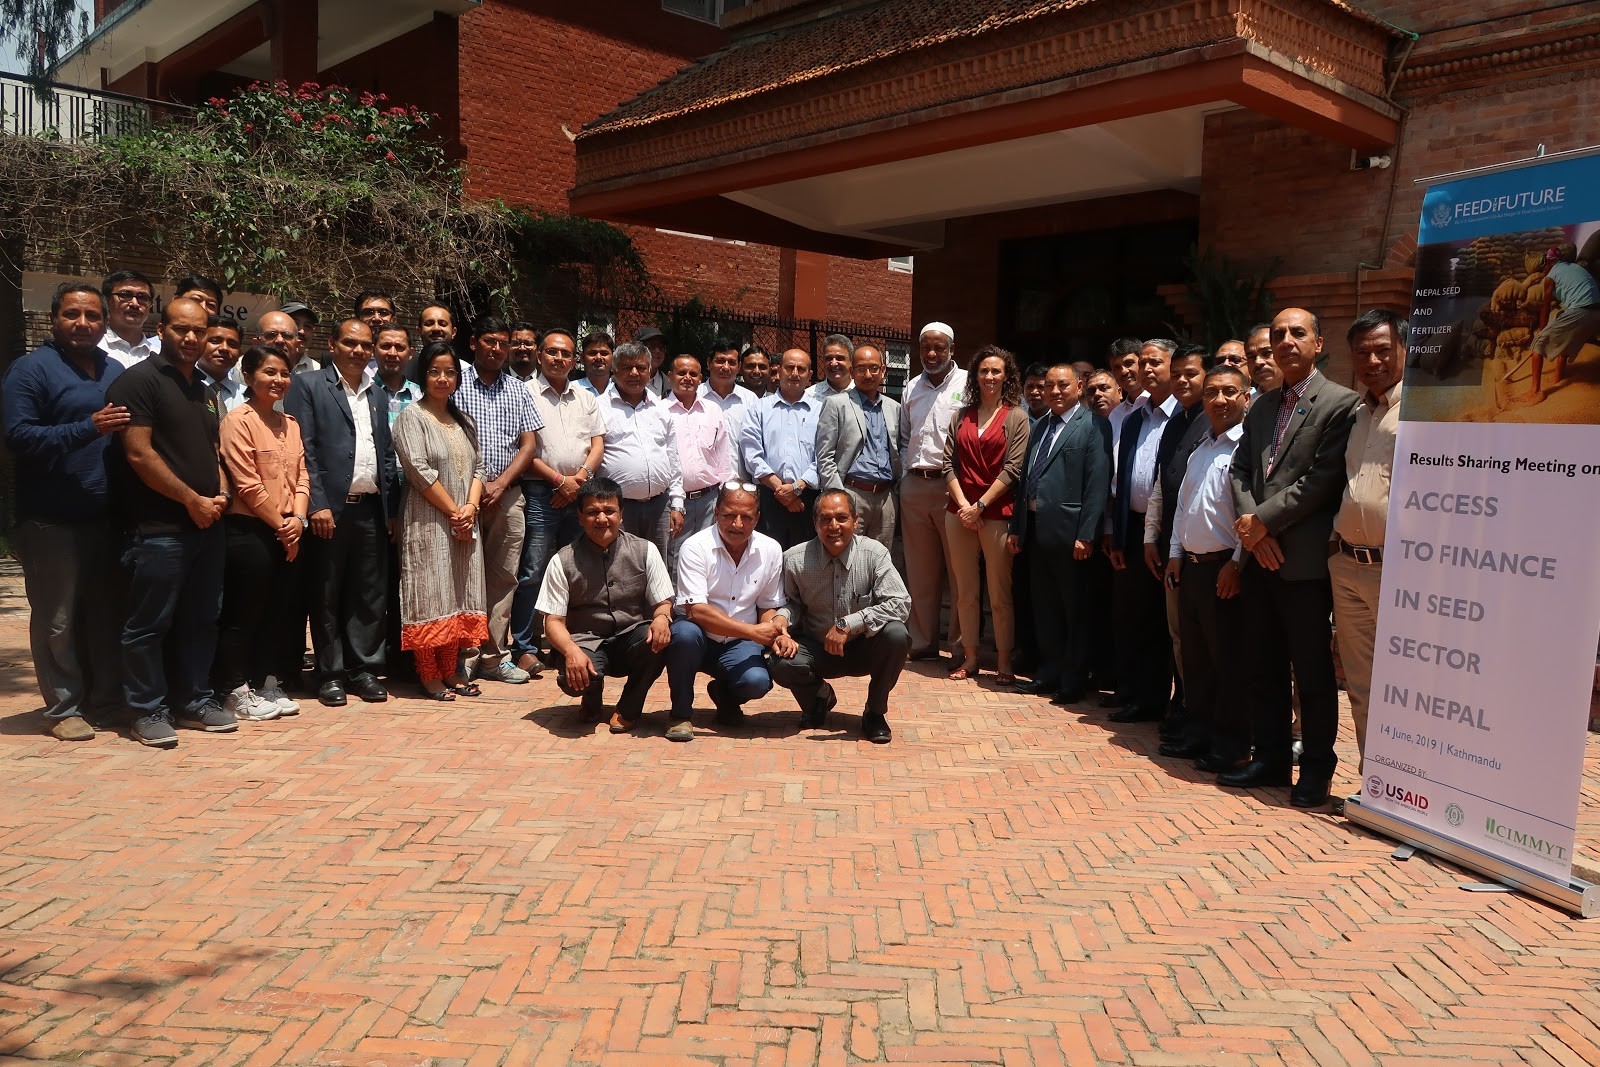 Participants of the results sharing meeting on Access to Finance in Seed Sector in Nepal. (Photo: Bandana Pradhan/CIMMYT)